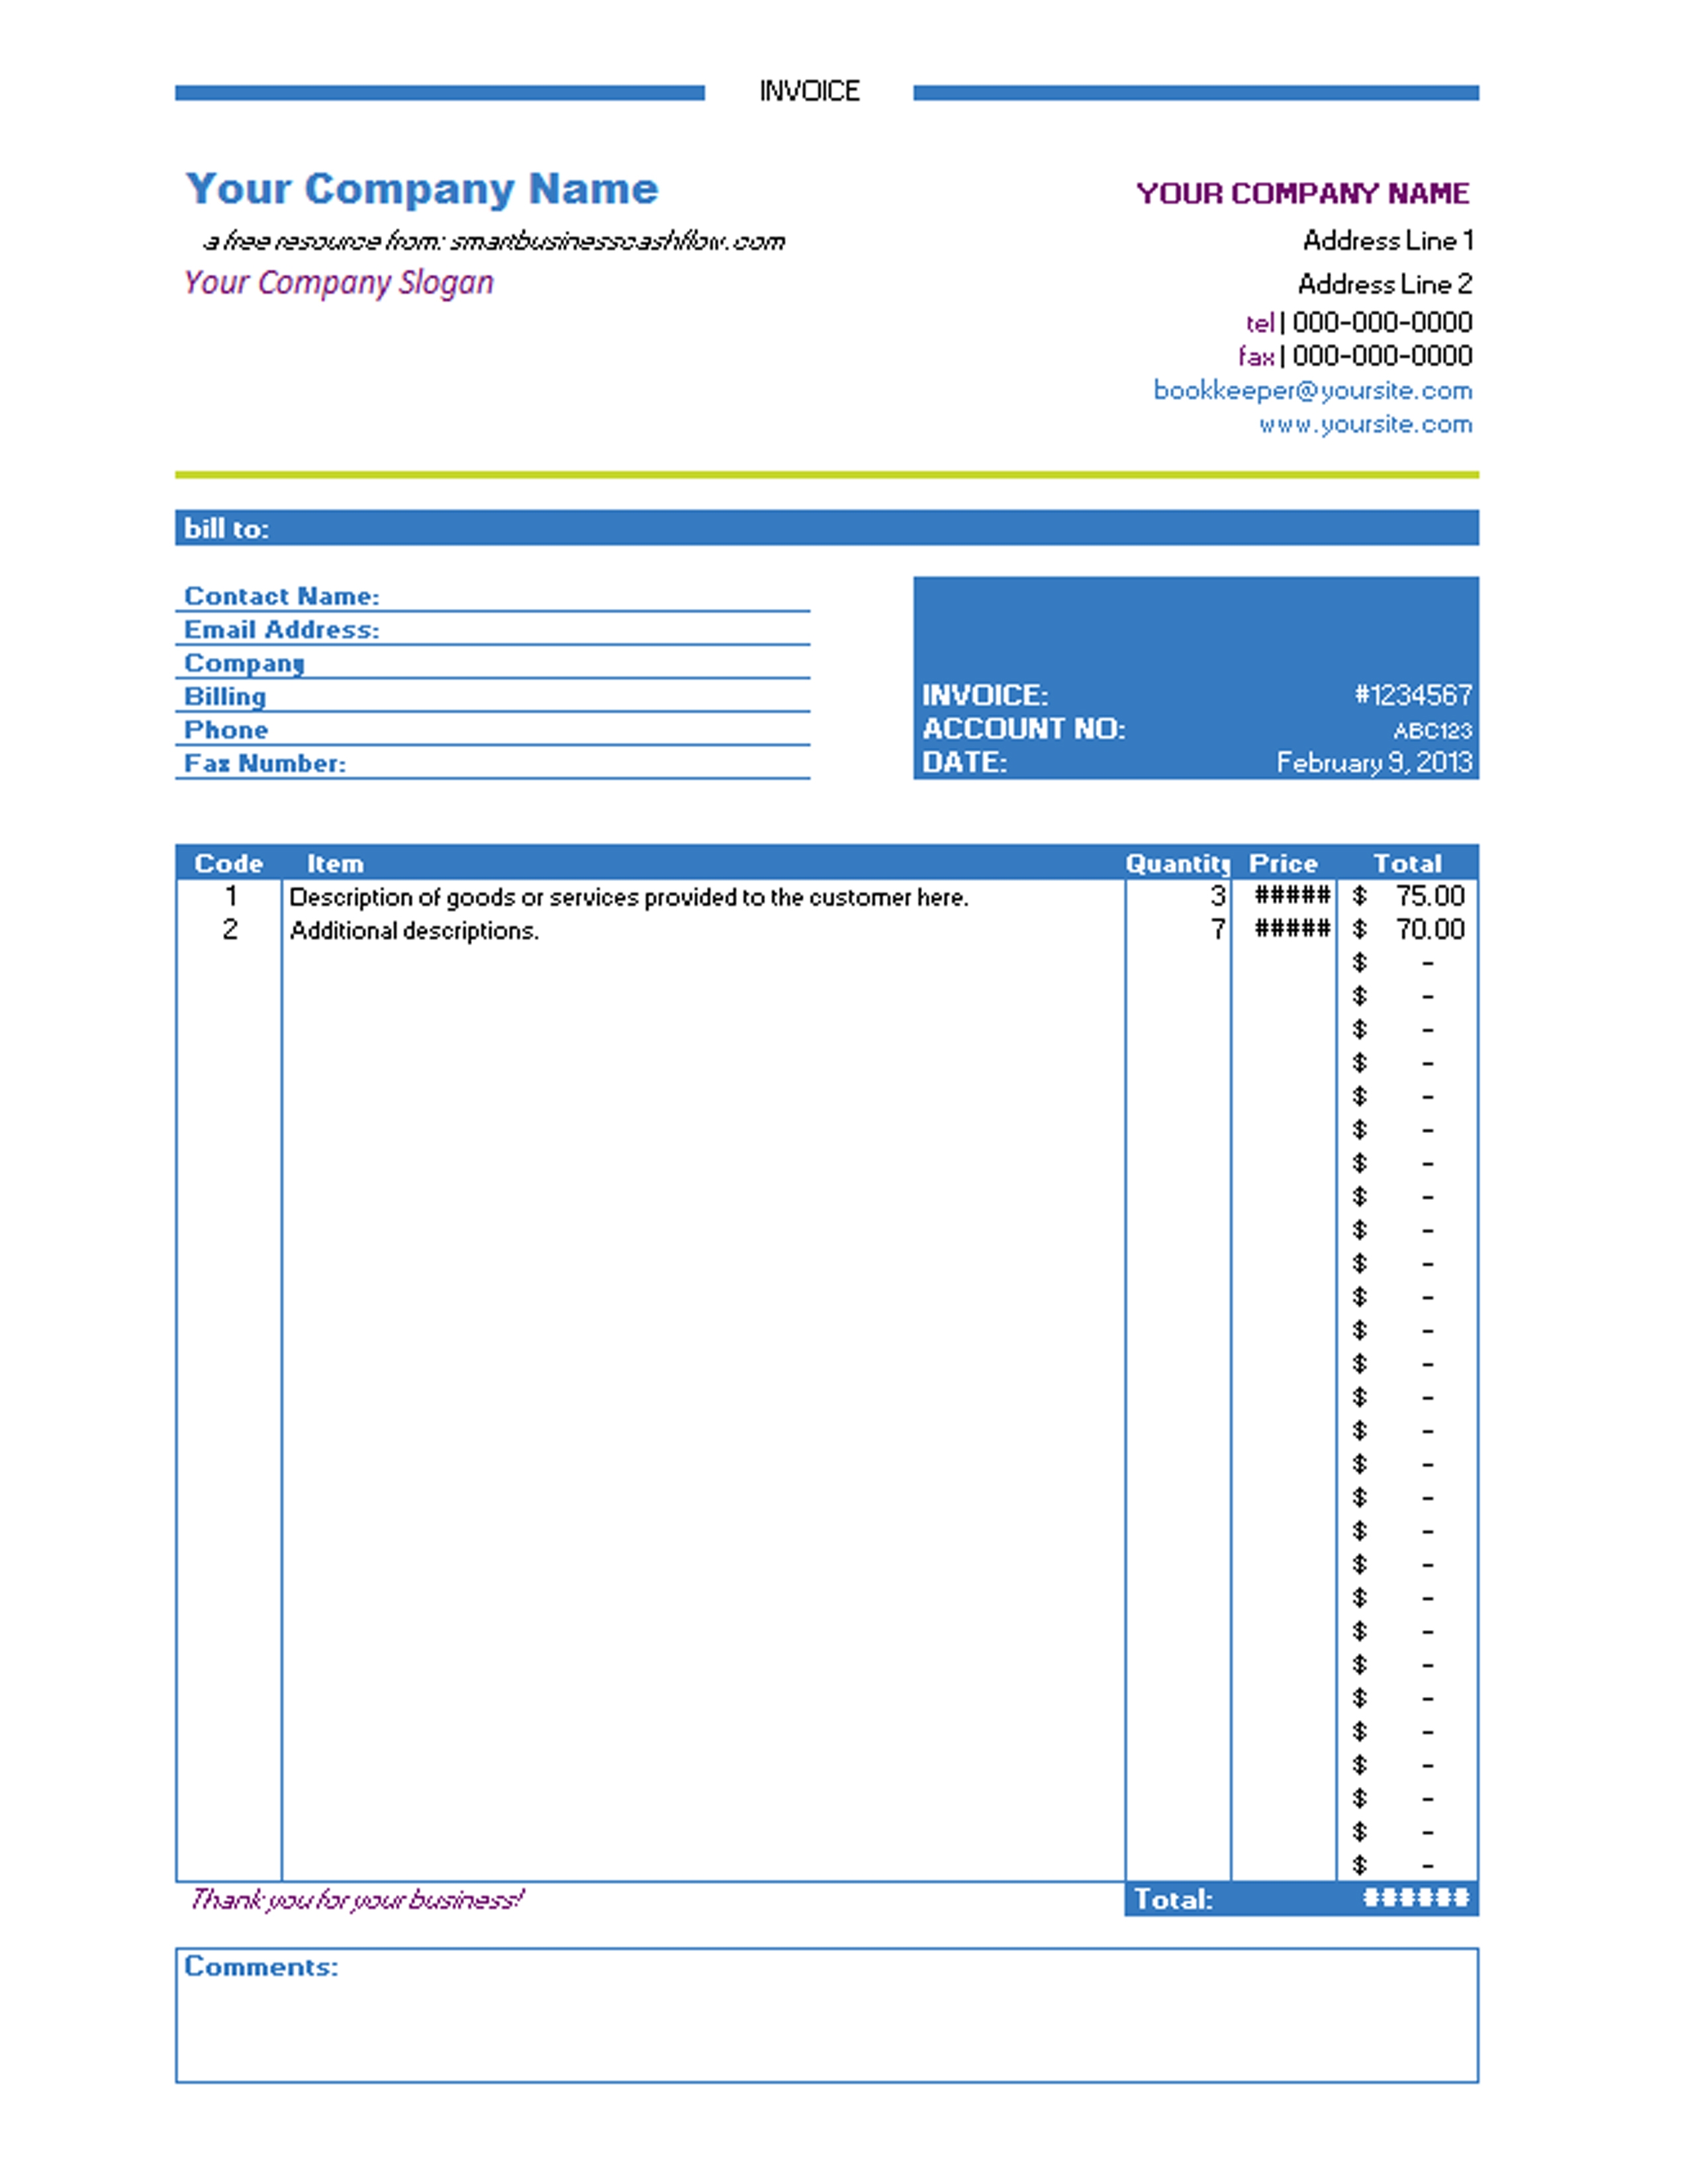 invoice template in excel free printable invoice invoice template in excel